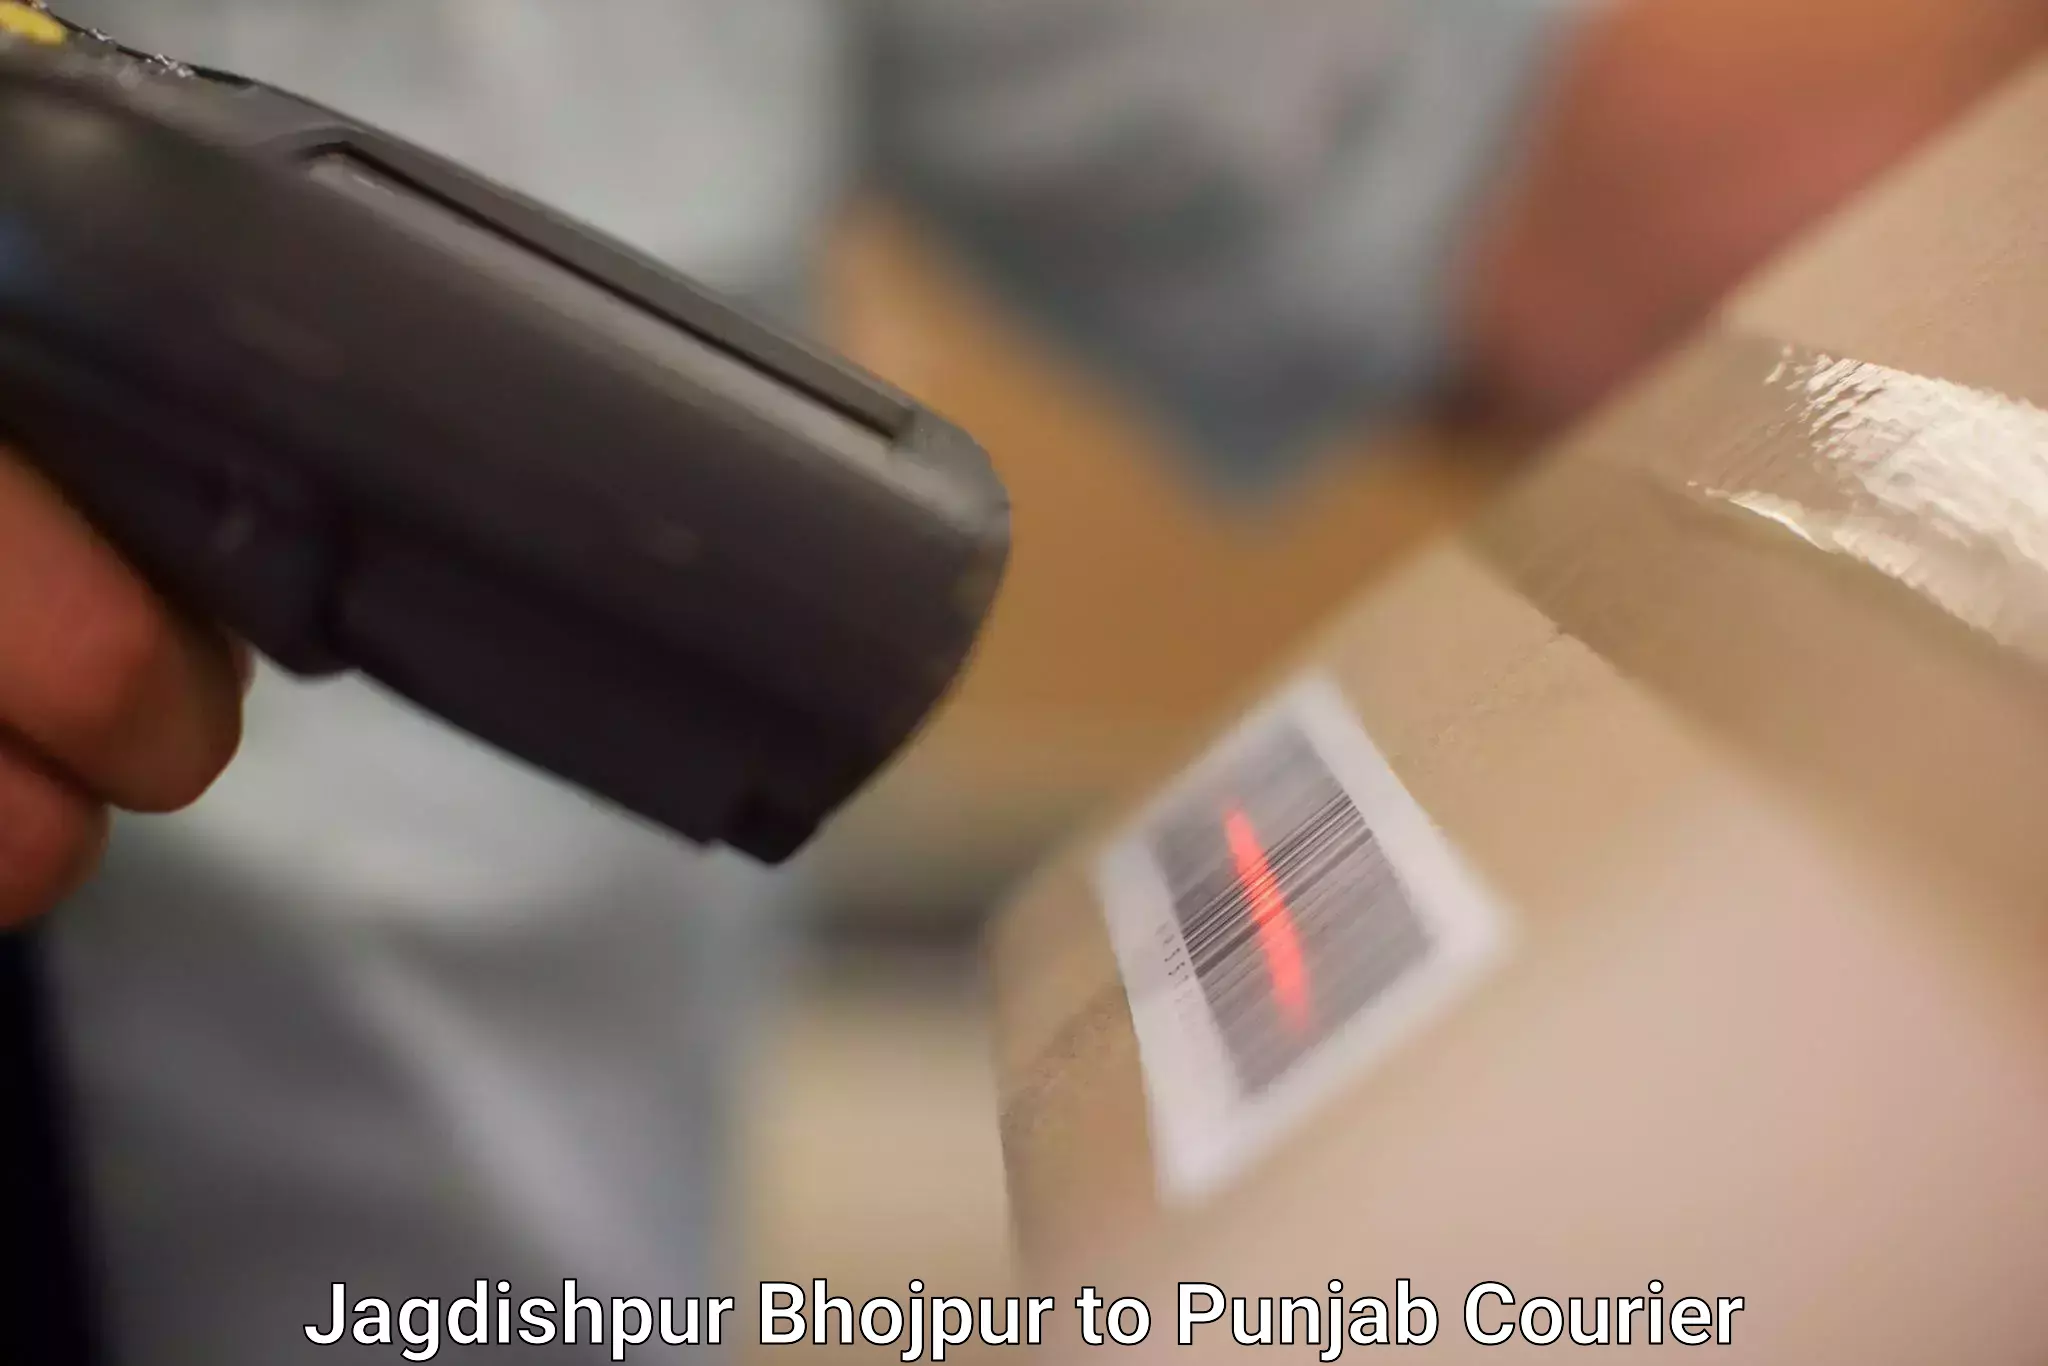 On-demand delivery in Jagdishpur Bhojpur to Mohali